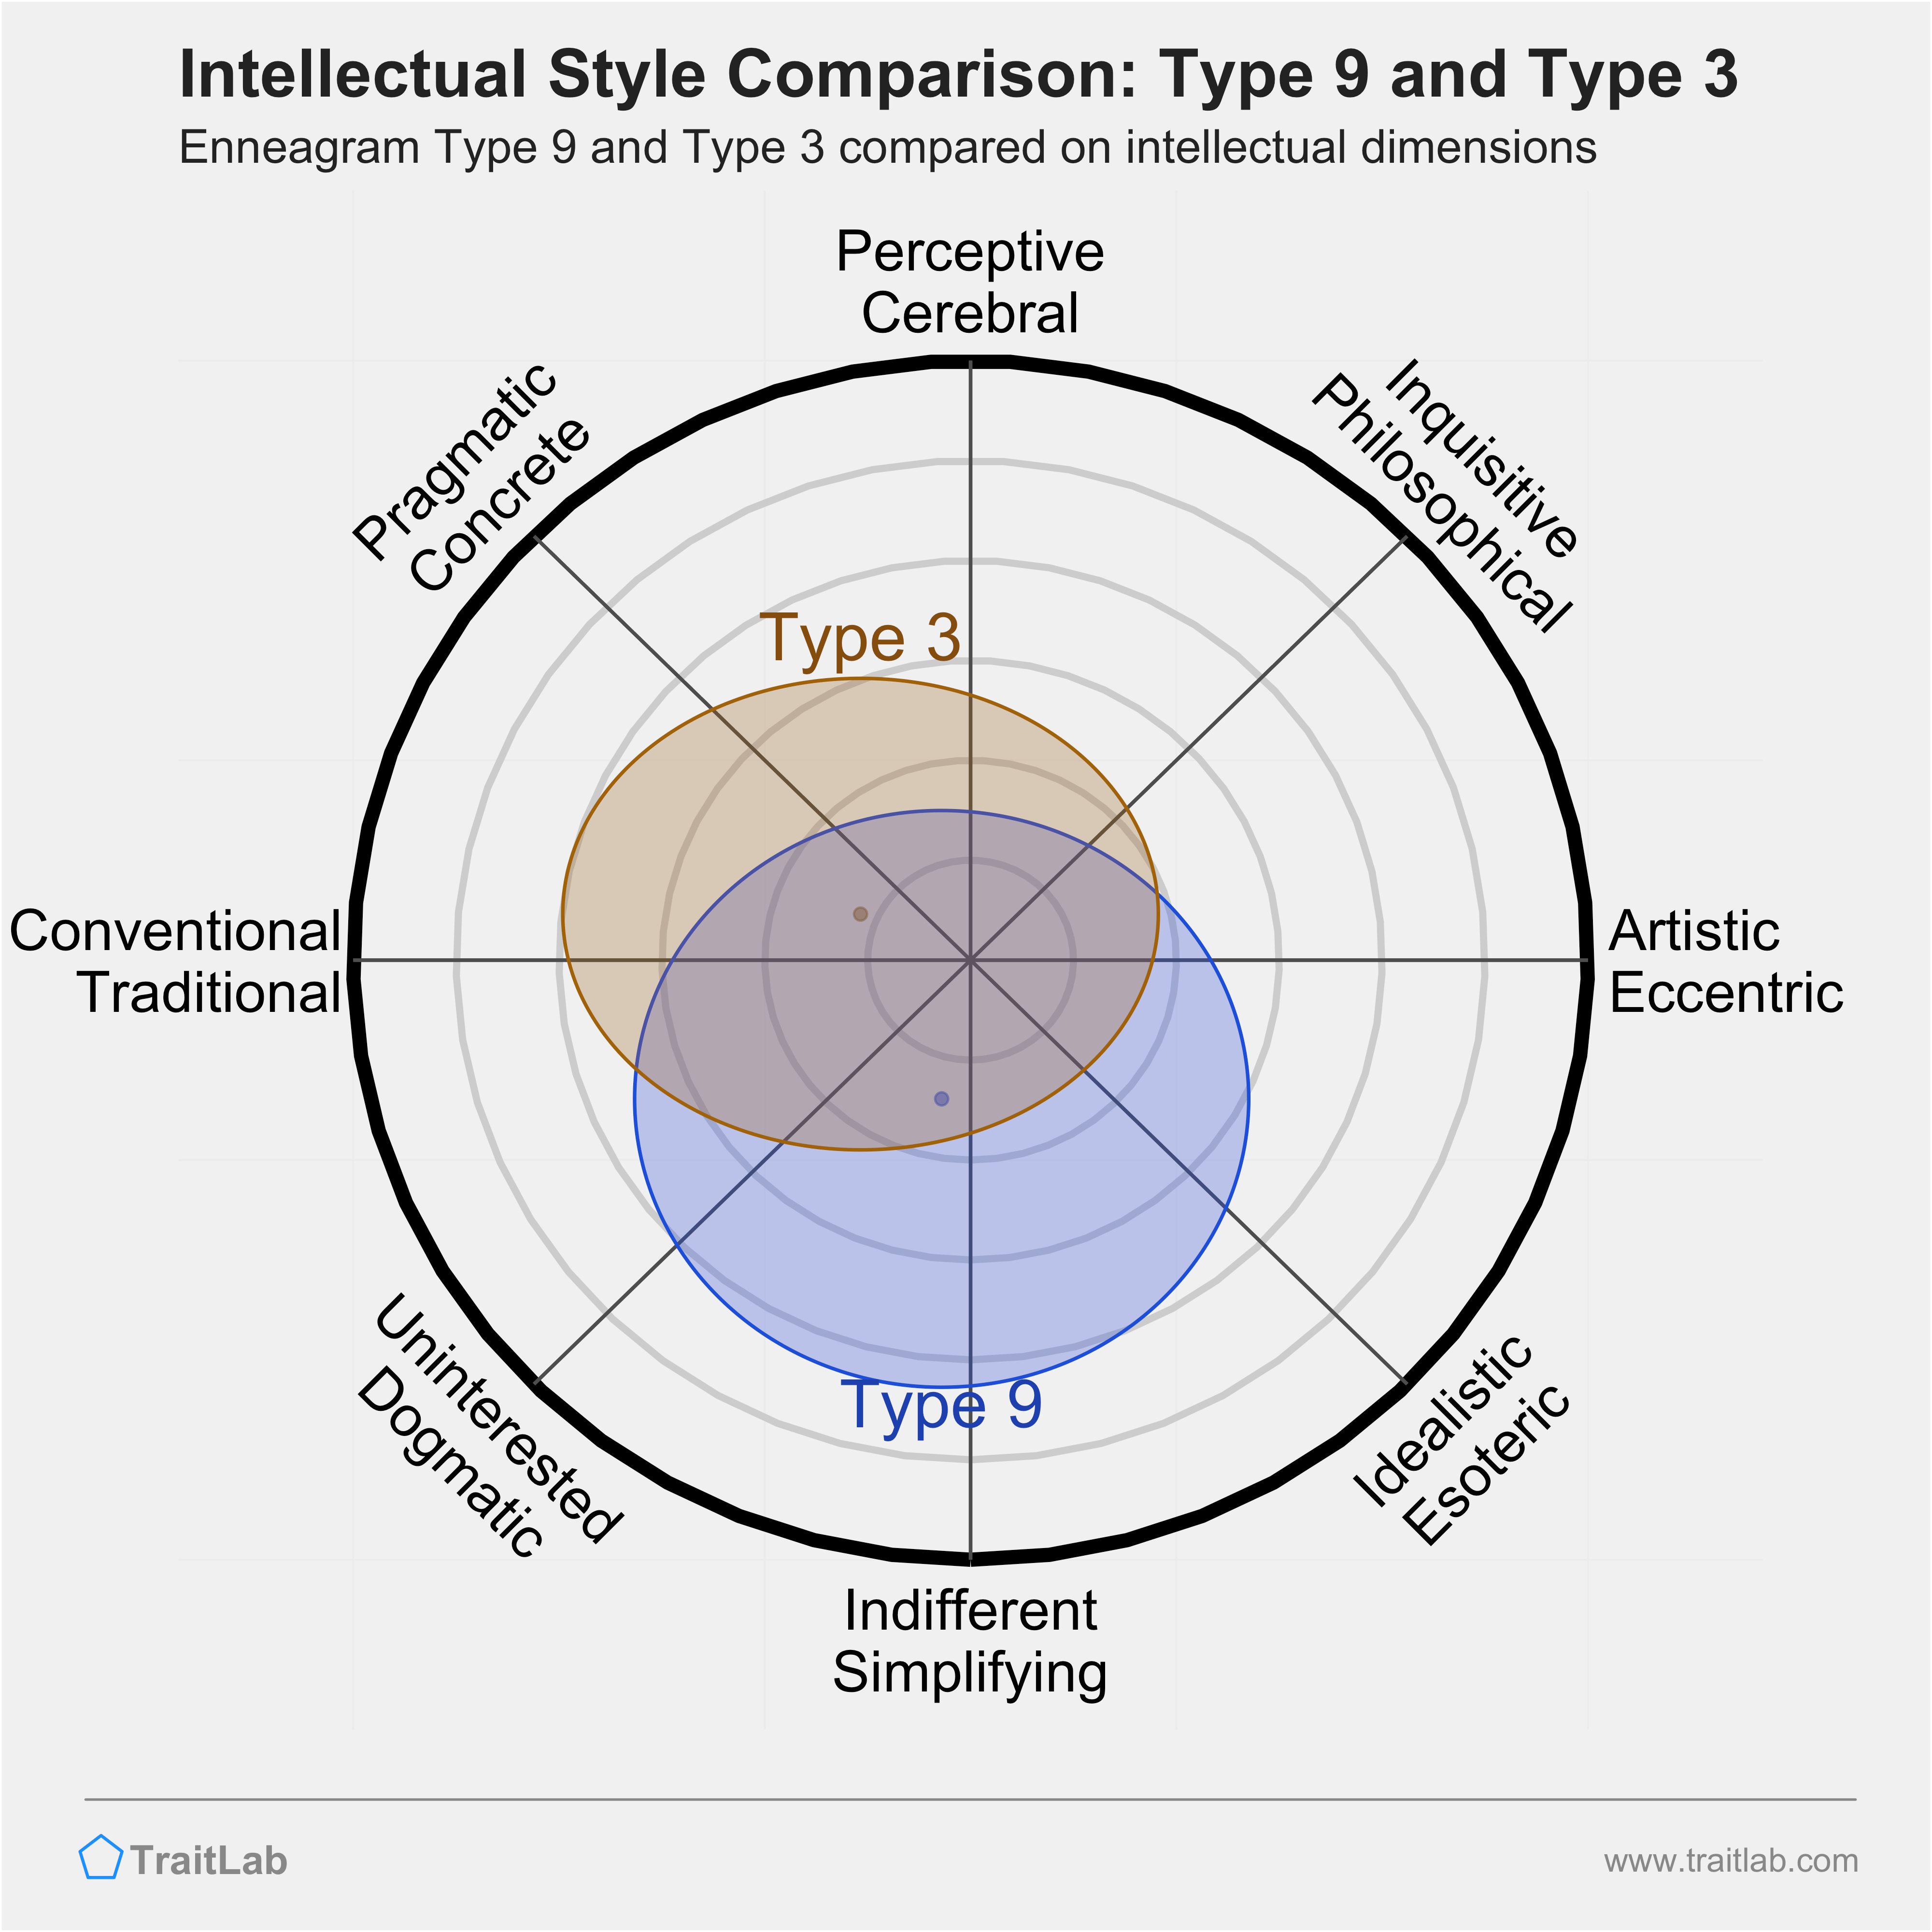 Type 9 and Type 3 comparison across intellectual dimensions